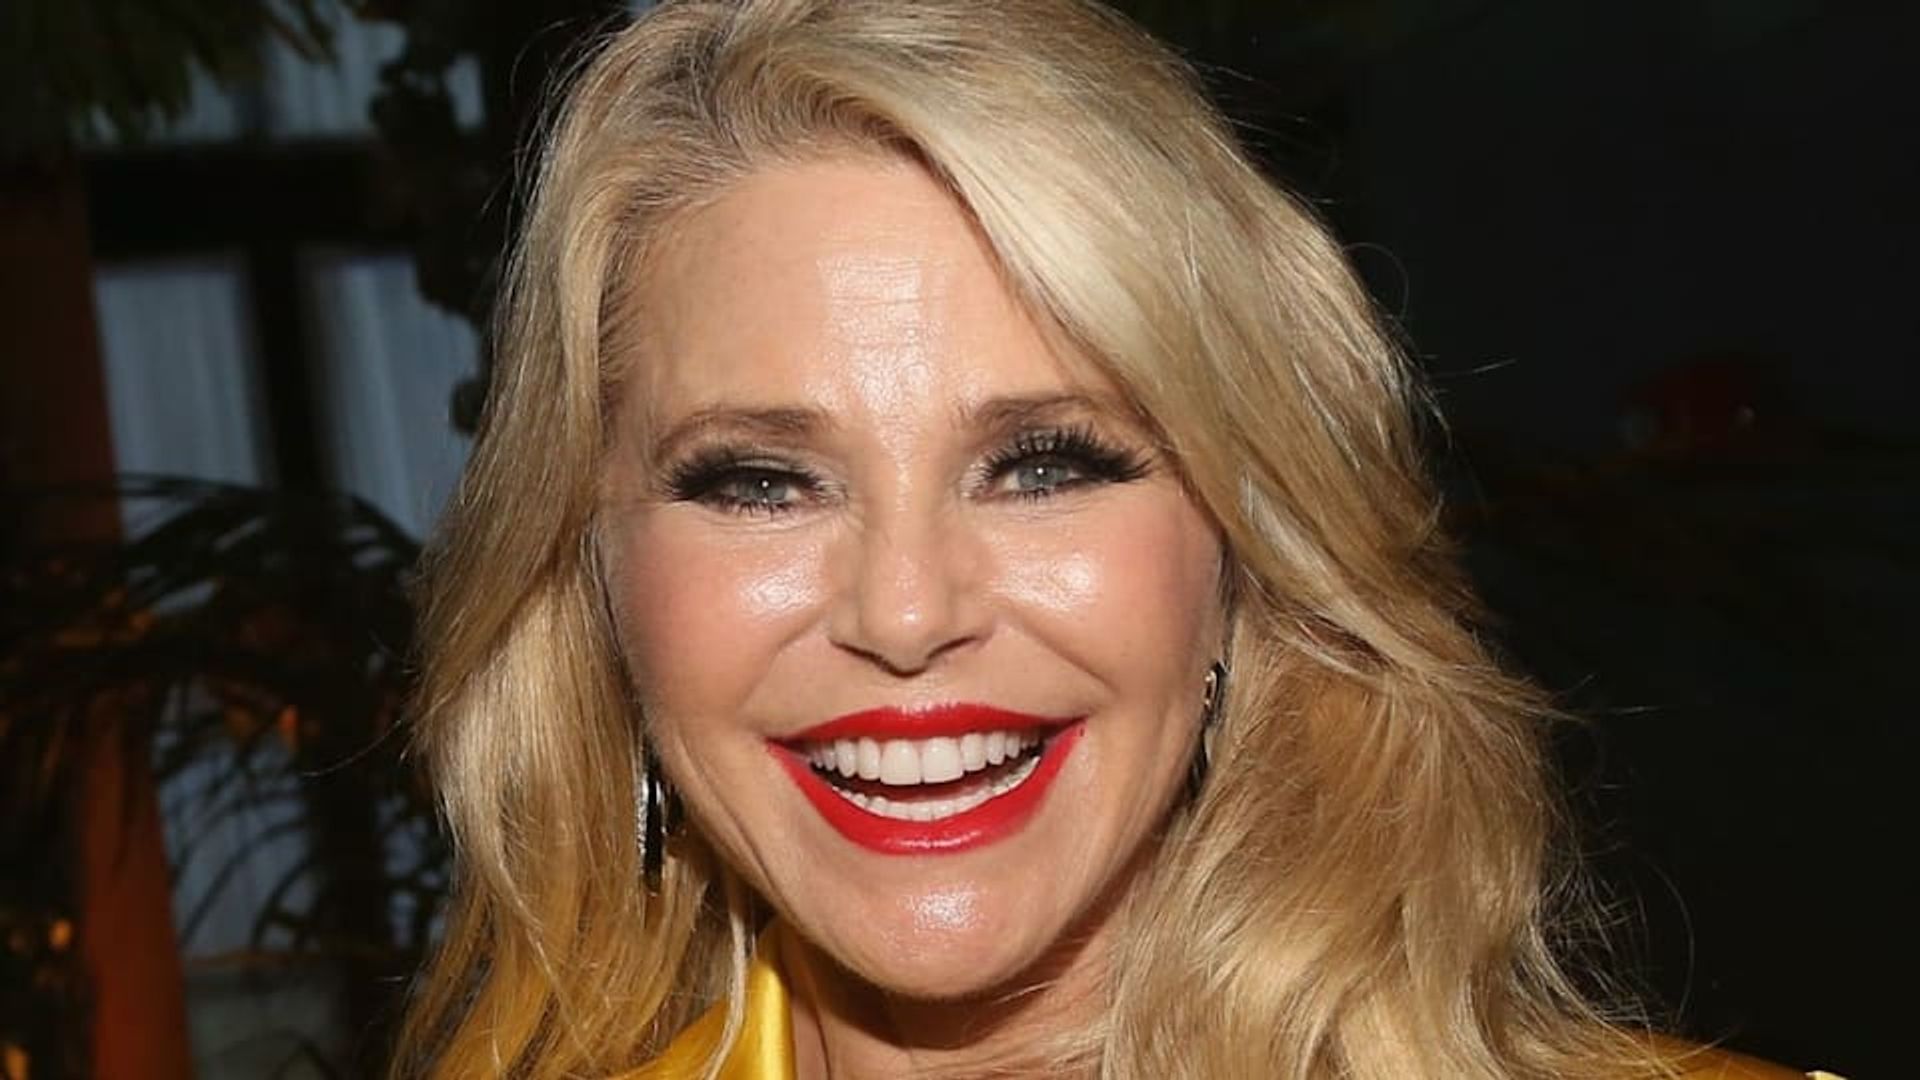 Christie Brinkley, 69, goes topless in stunning throwback photo